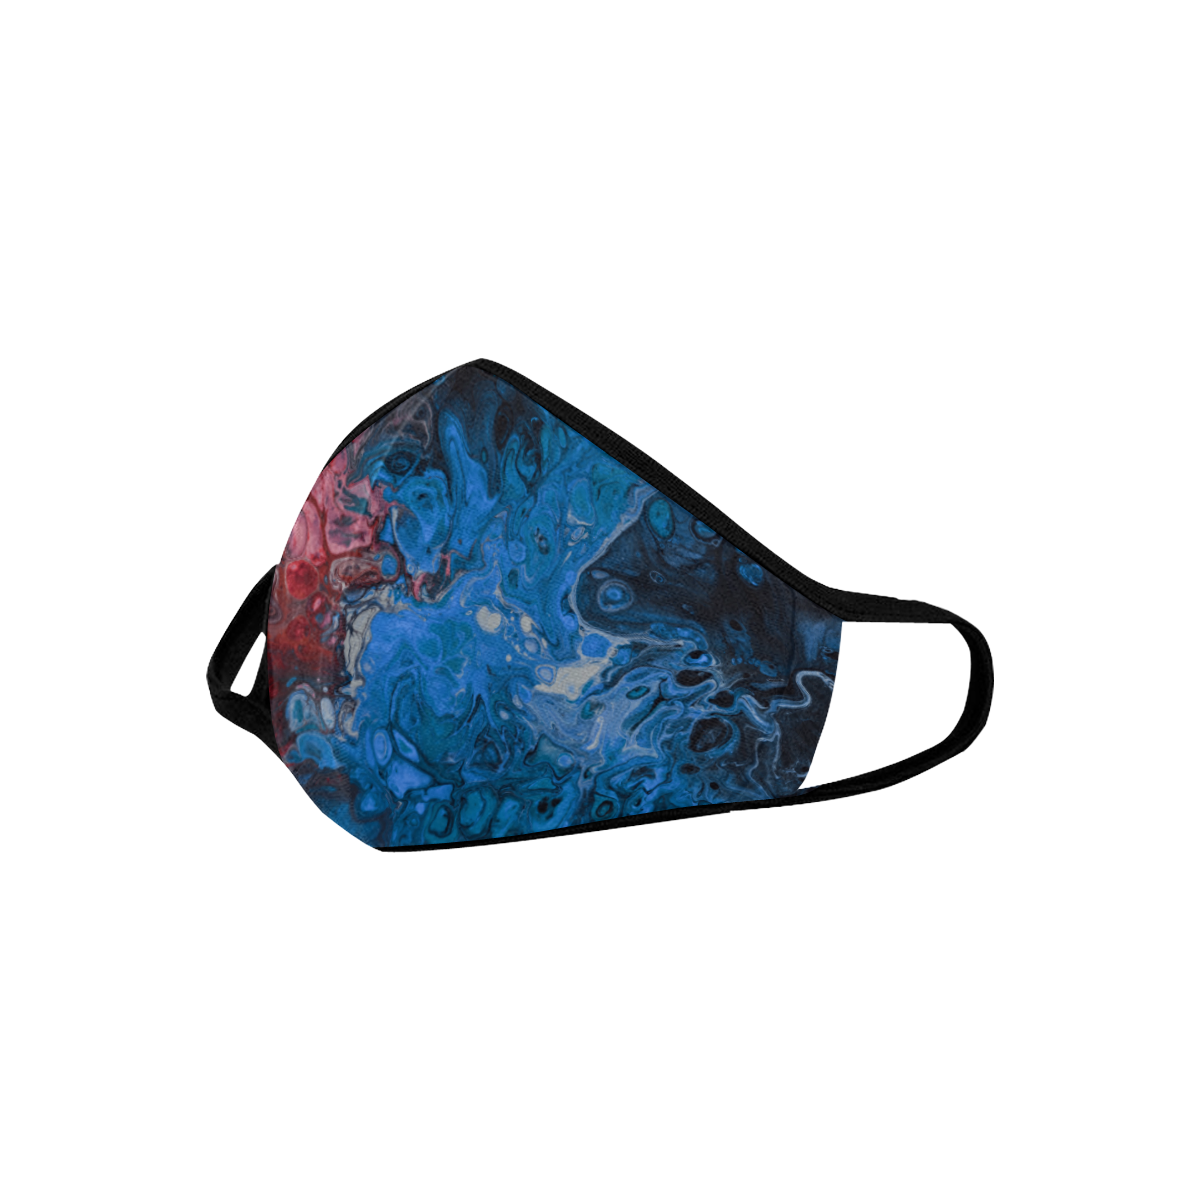 Alien Swirl Blue & Red Mouth Mask. Mouth Mask